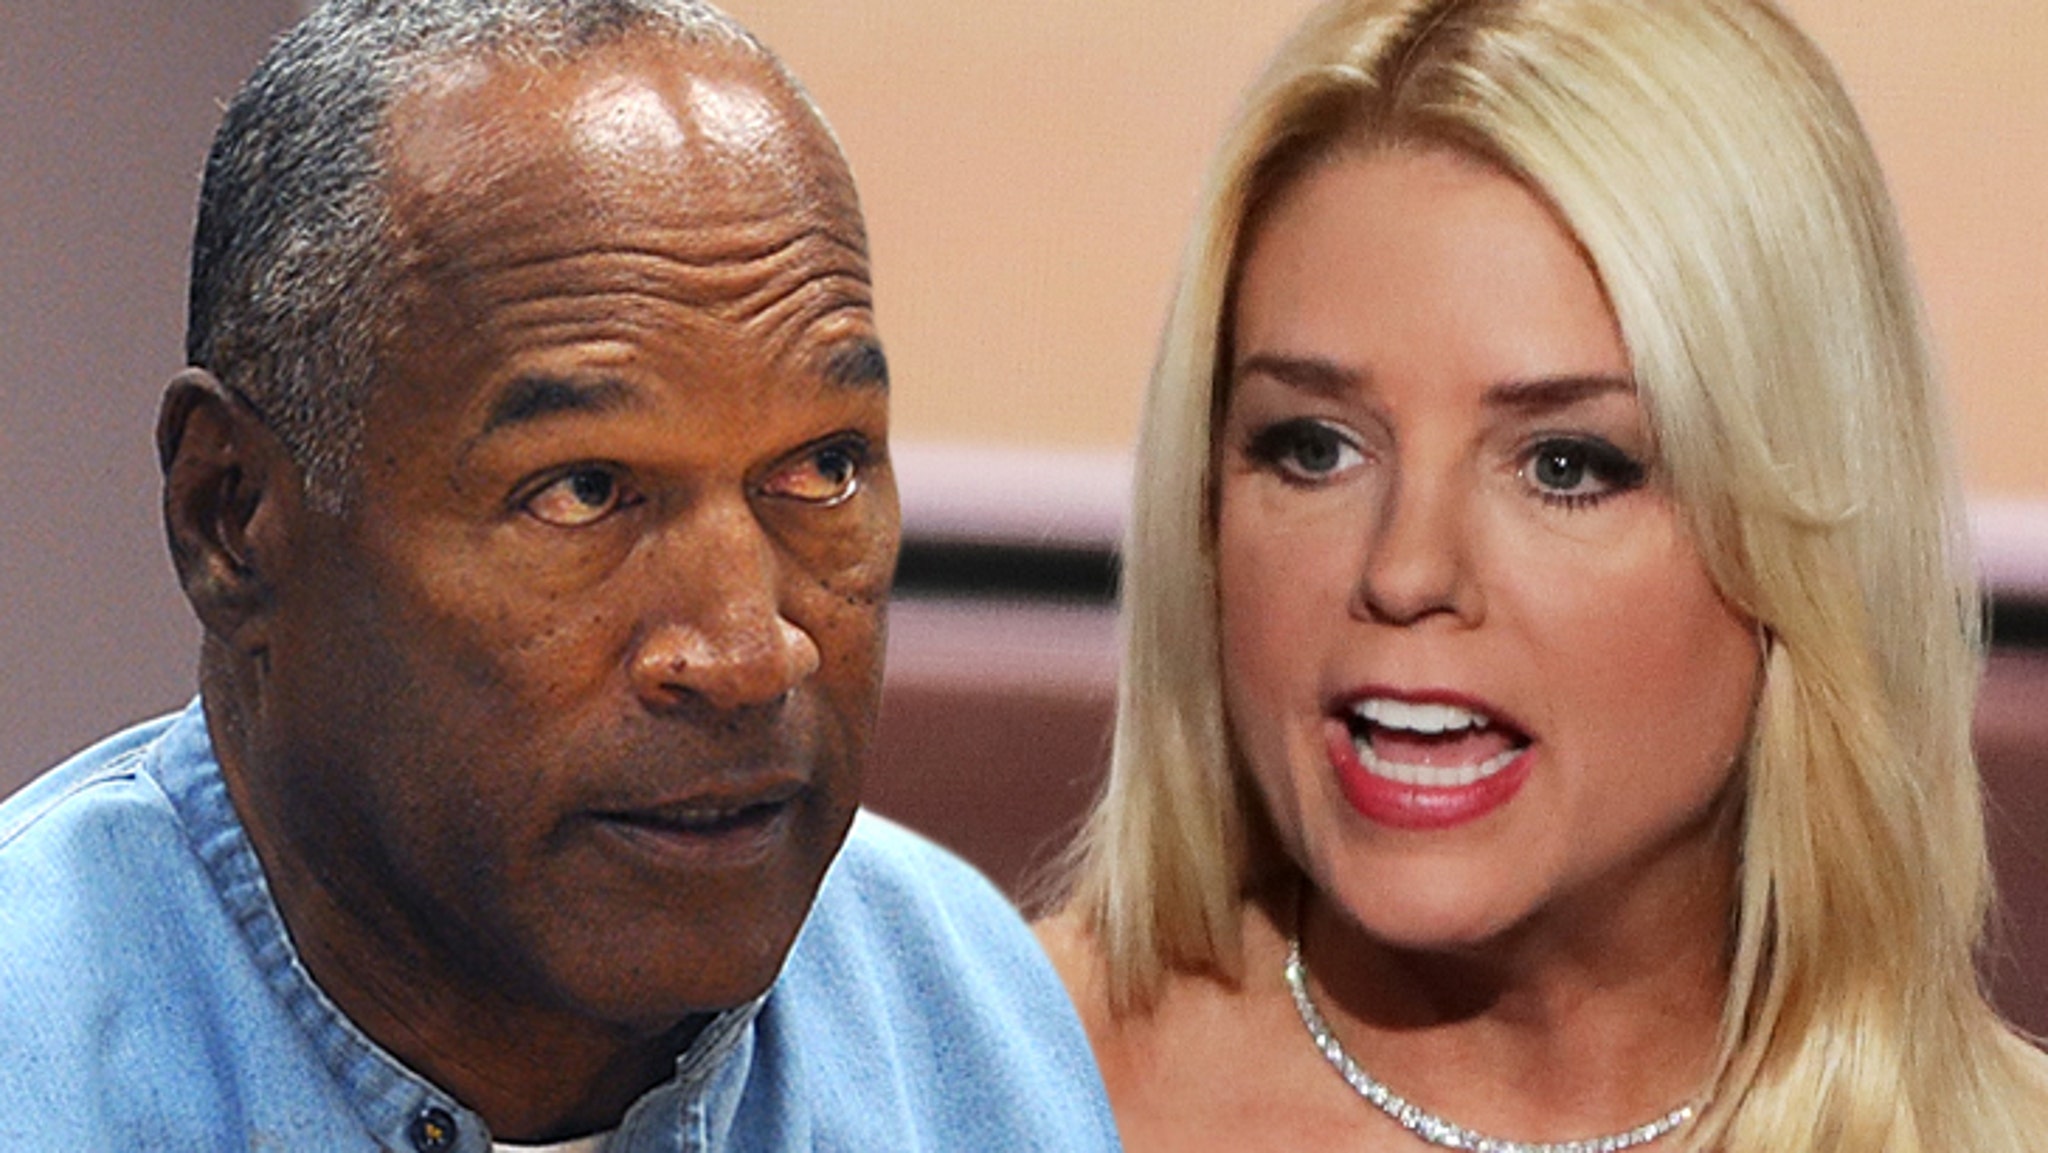 O.J. Simpson, You're Not Welcome in Florida